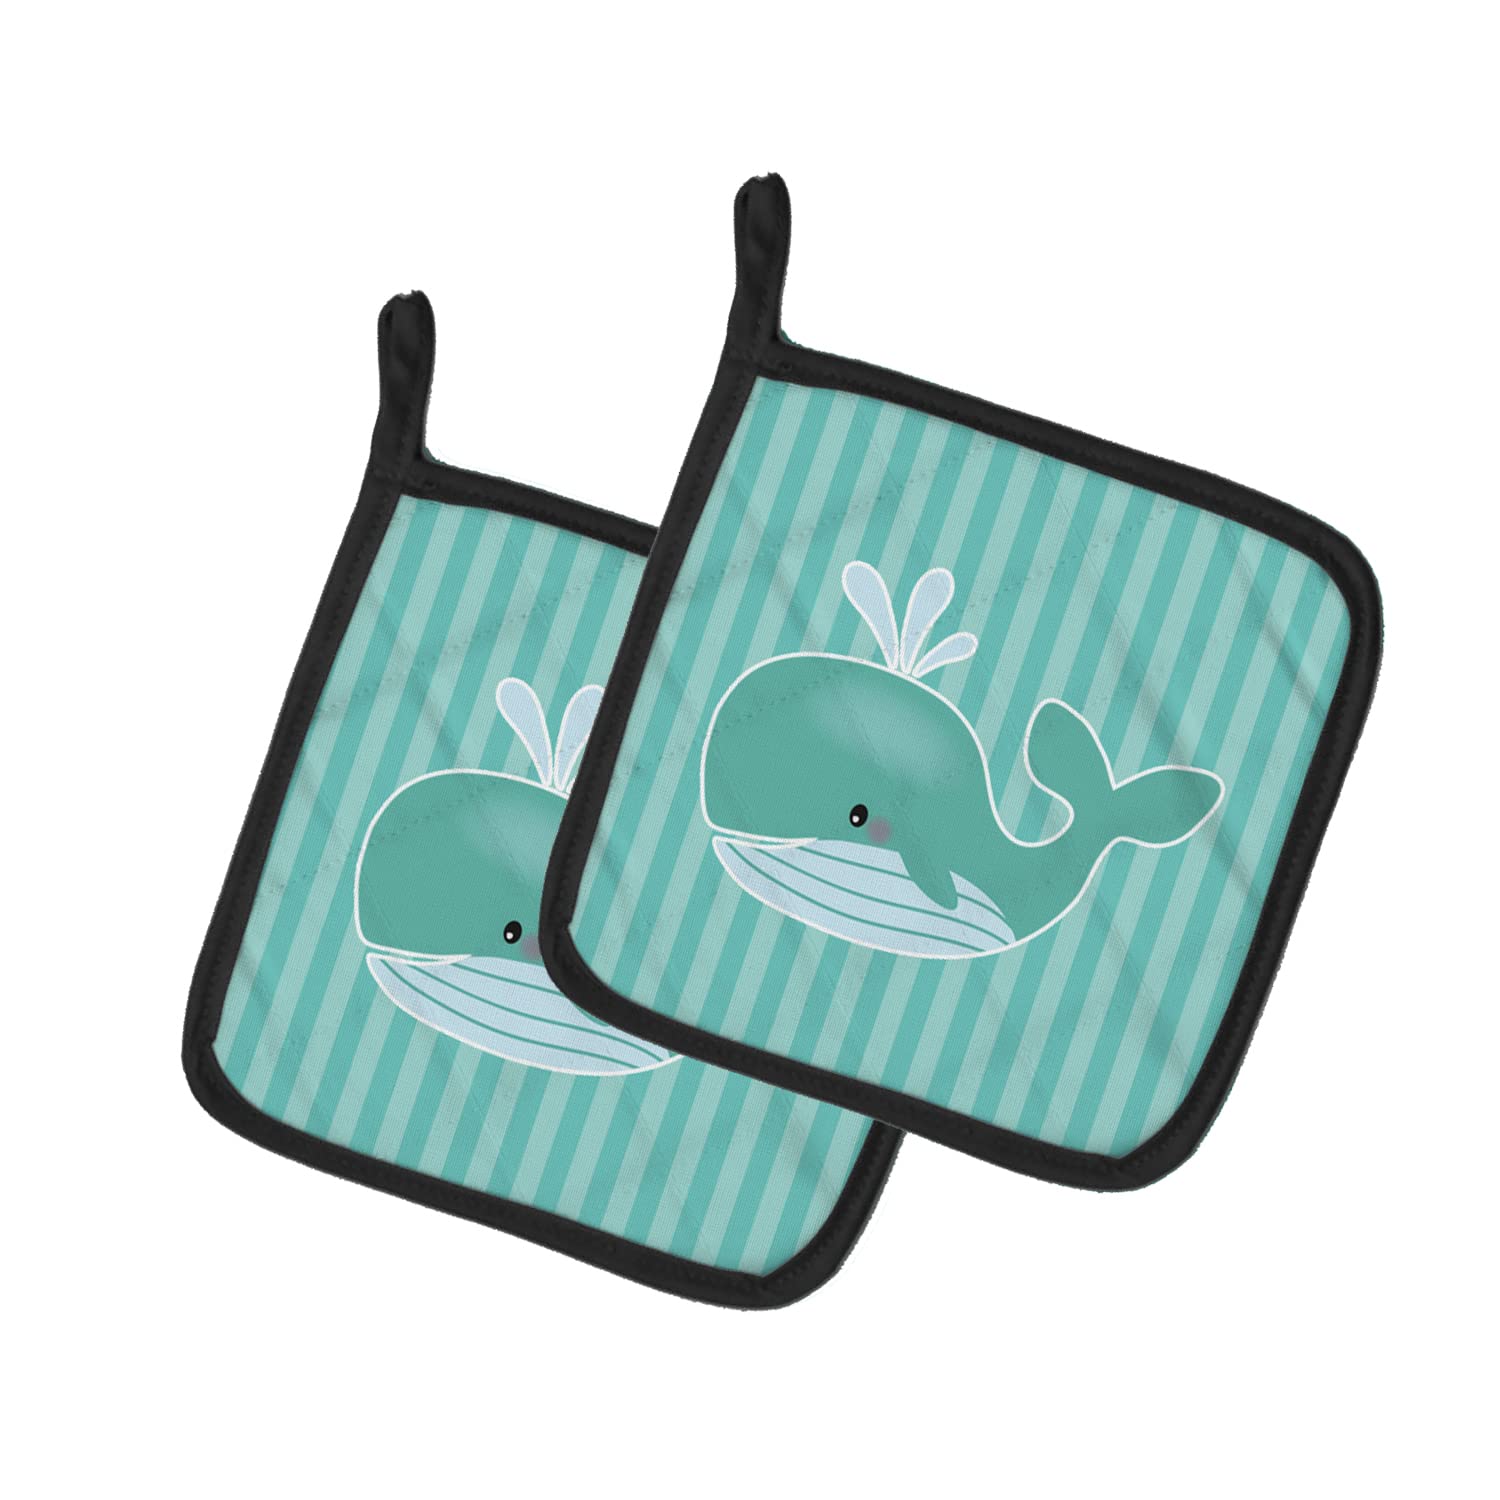 Caroline's Treasures BB7125PTHD Whale Pair of Pot Holders Kitchen Heat Resistant Pot Holders Sets Oven Hot Pads for Cooking Baking BBQ, 7 1/2 x 7 1/2